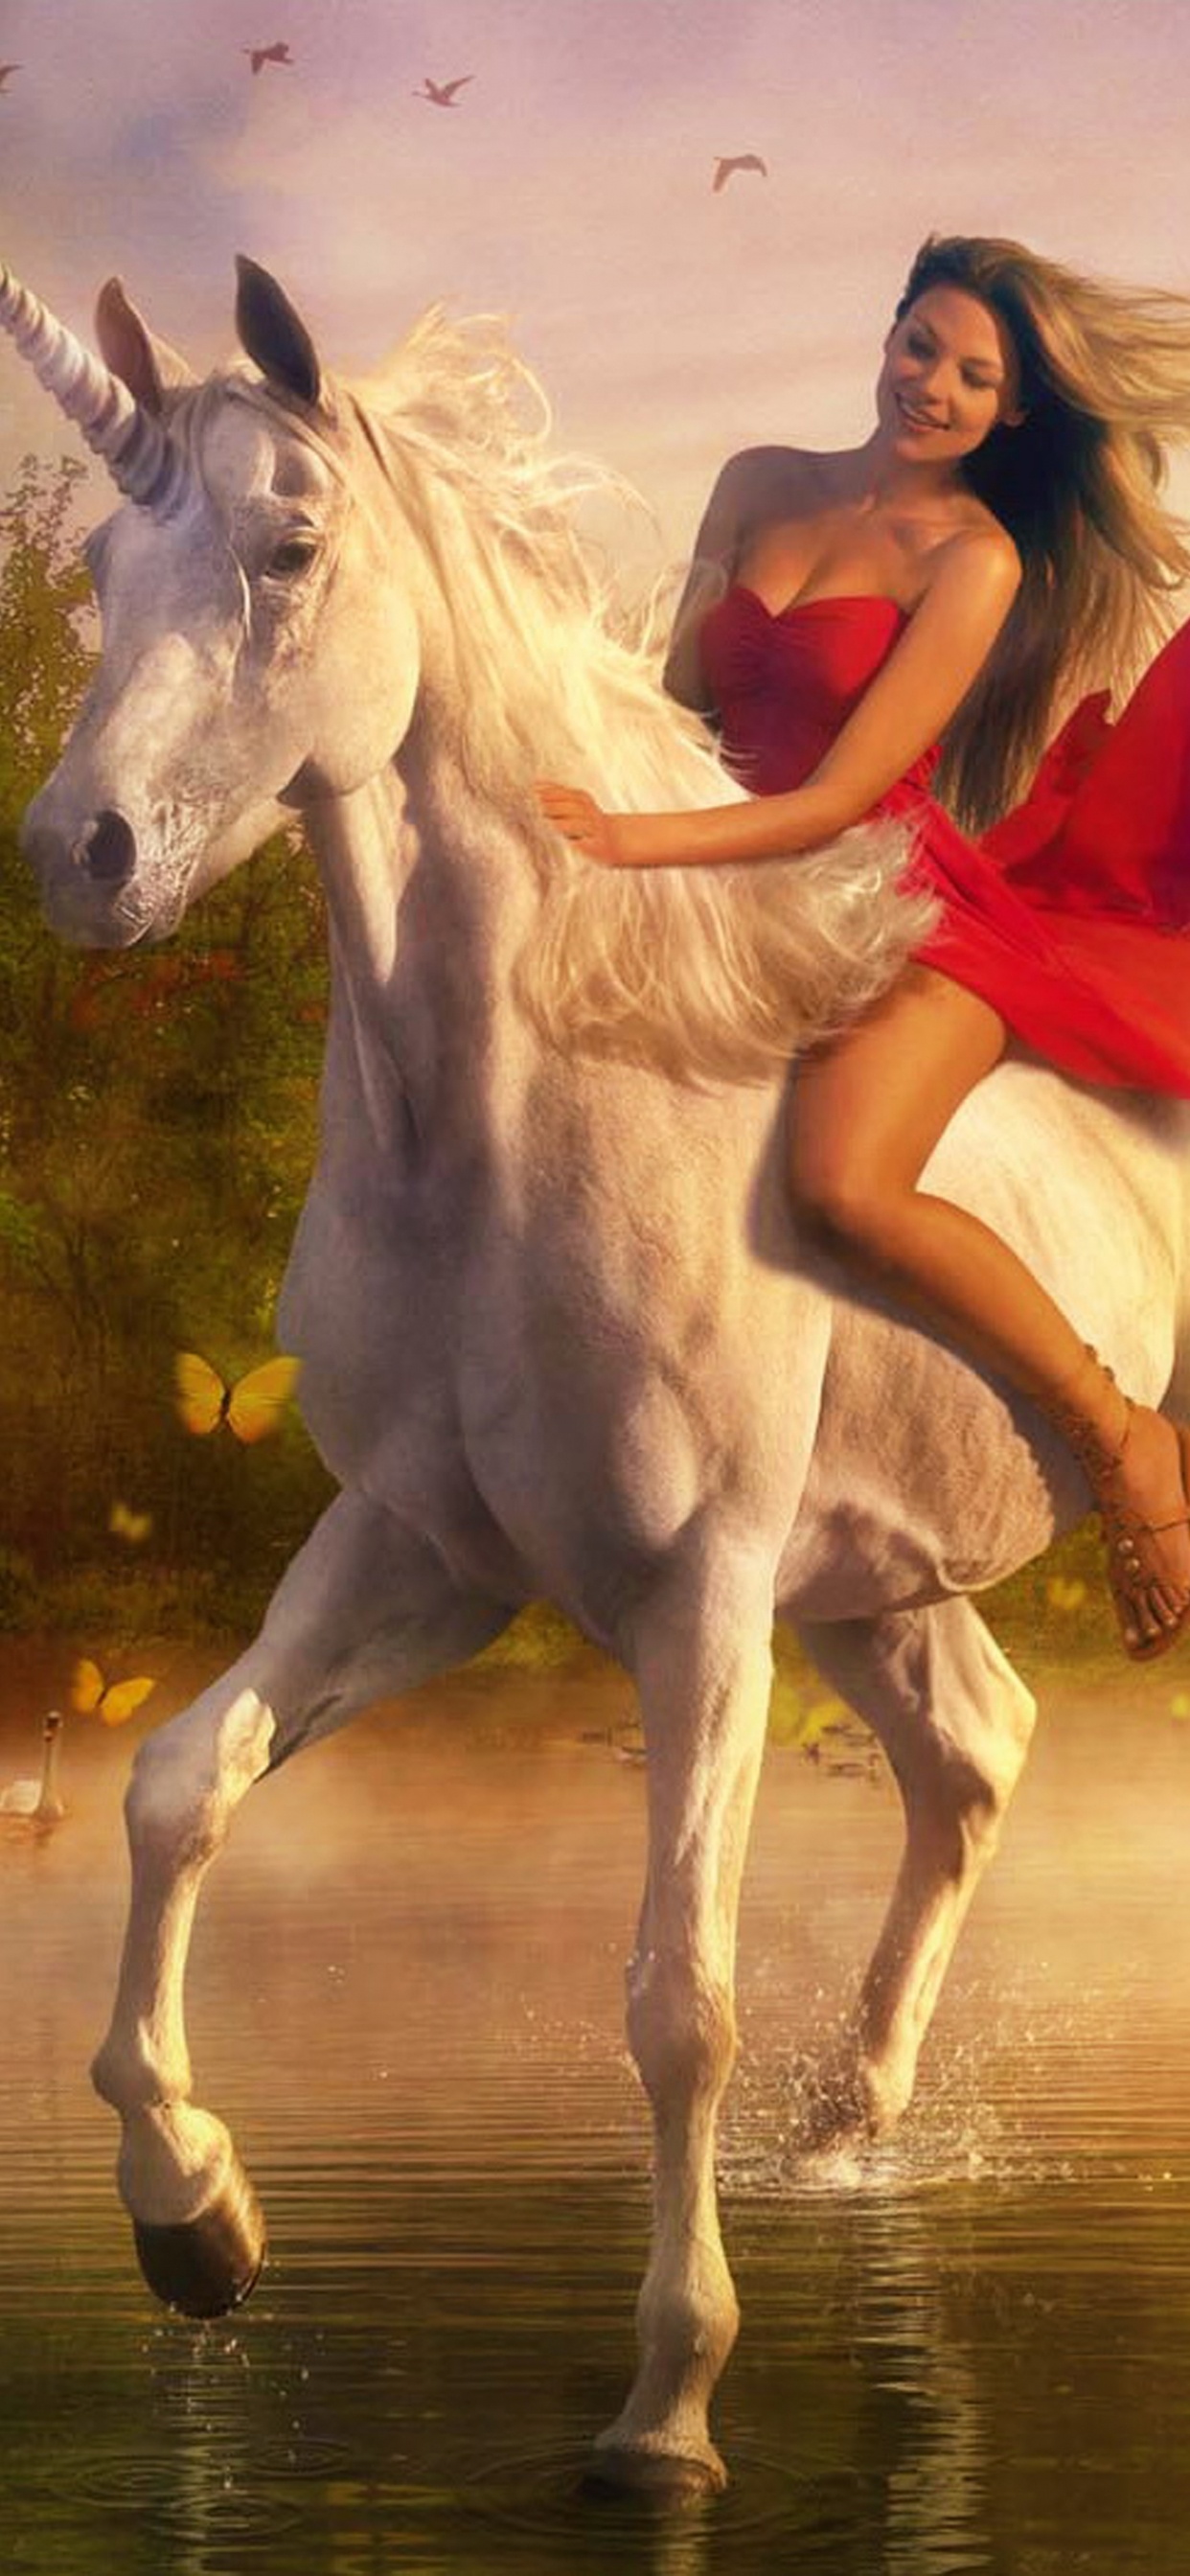 Woman in Red Dress Riding White Horse on Water. Wallpaper in 1242x2688 Resolution